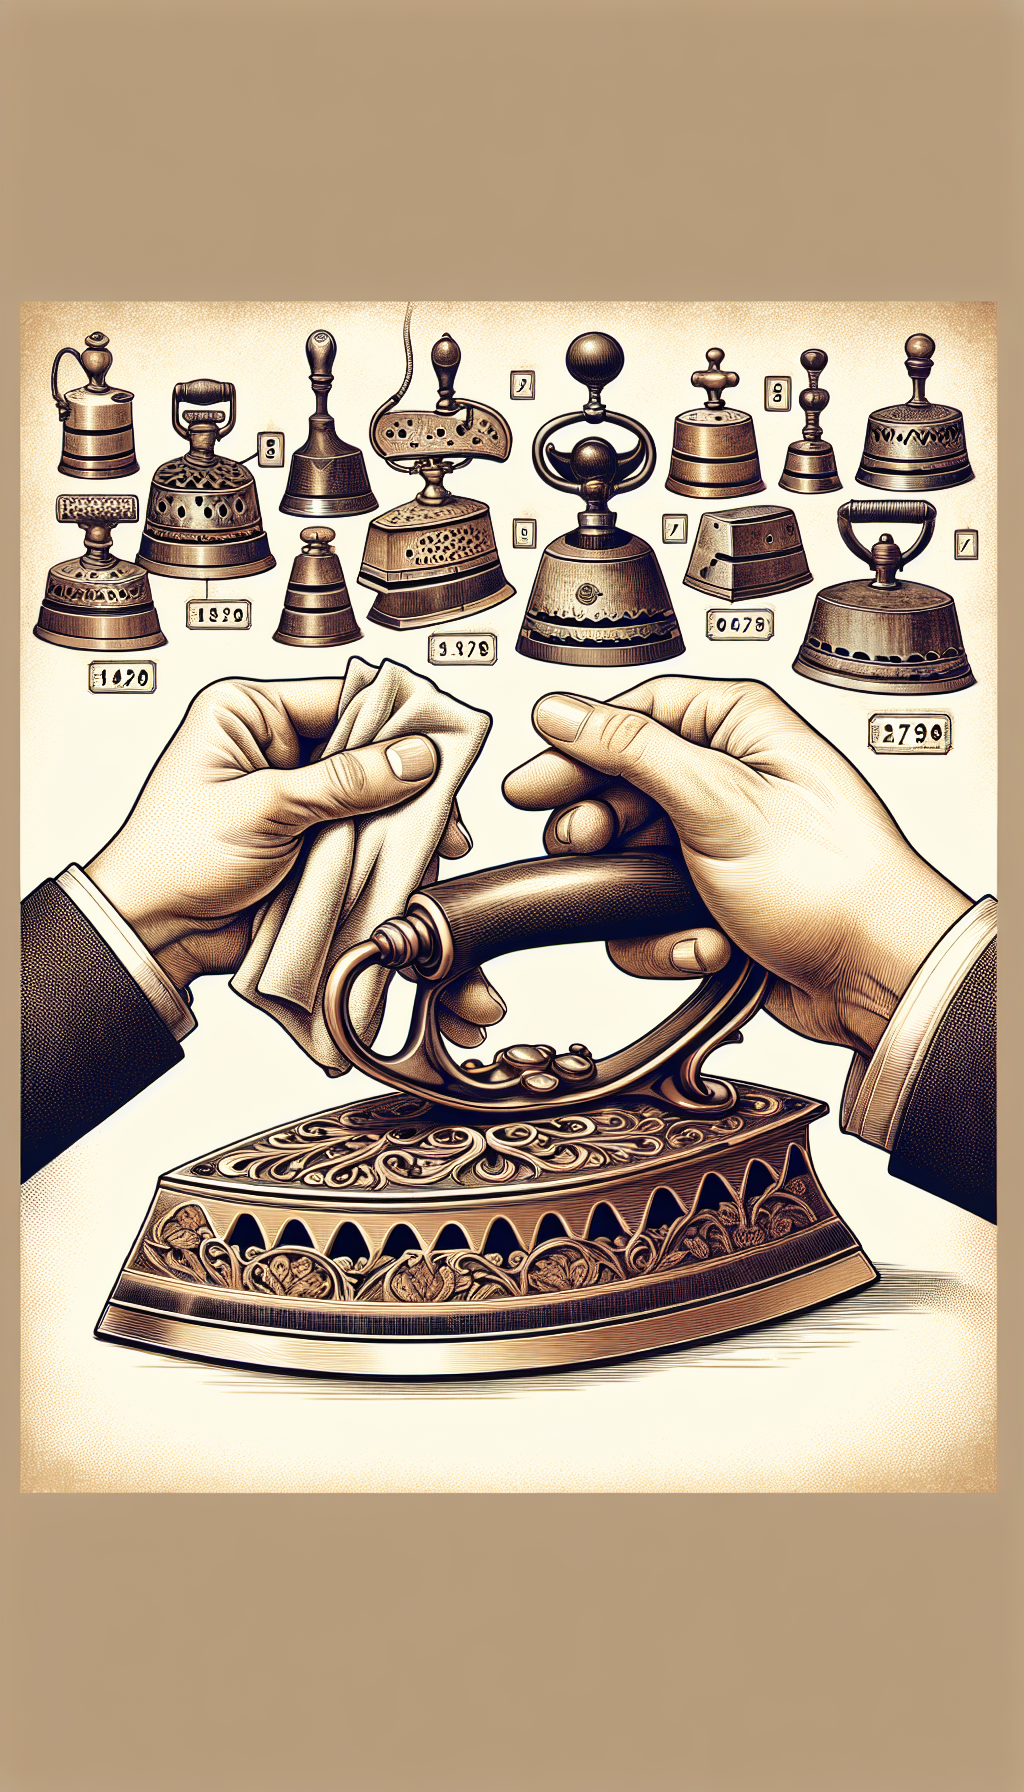 An illustration shows a pair of hands gently holding a cloth and polishing an ornate, antique sad iron, with visible manufacturer's marks highlighted for identification. The background is a softly shaded array of different sad irons, each with a faint, numbered label, creating a subtle visual guide for enthusiasts to identify and care for their heirloom collections.